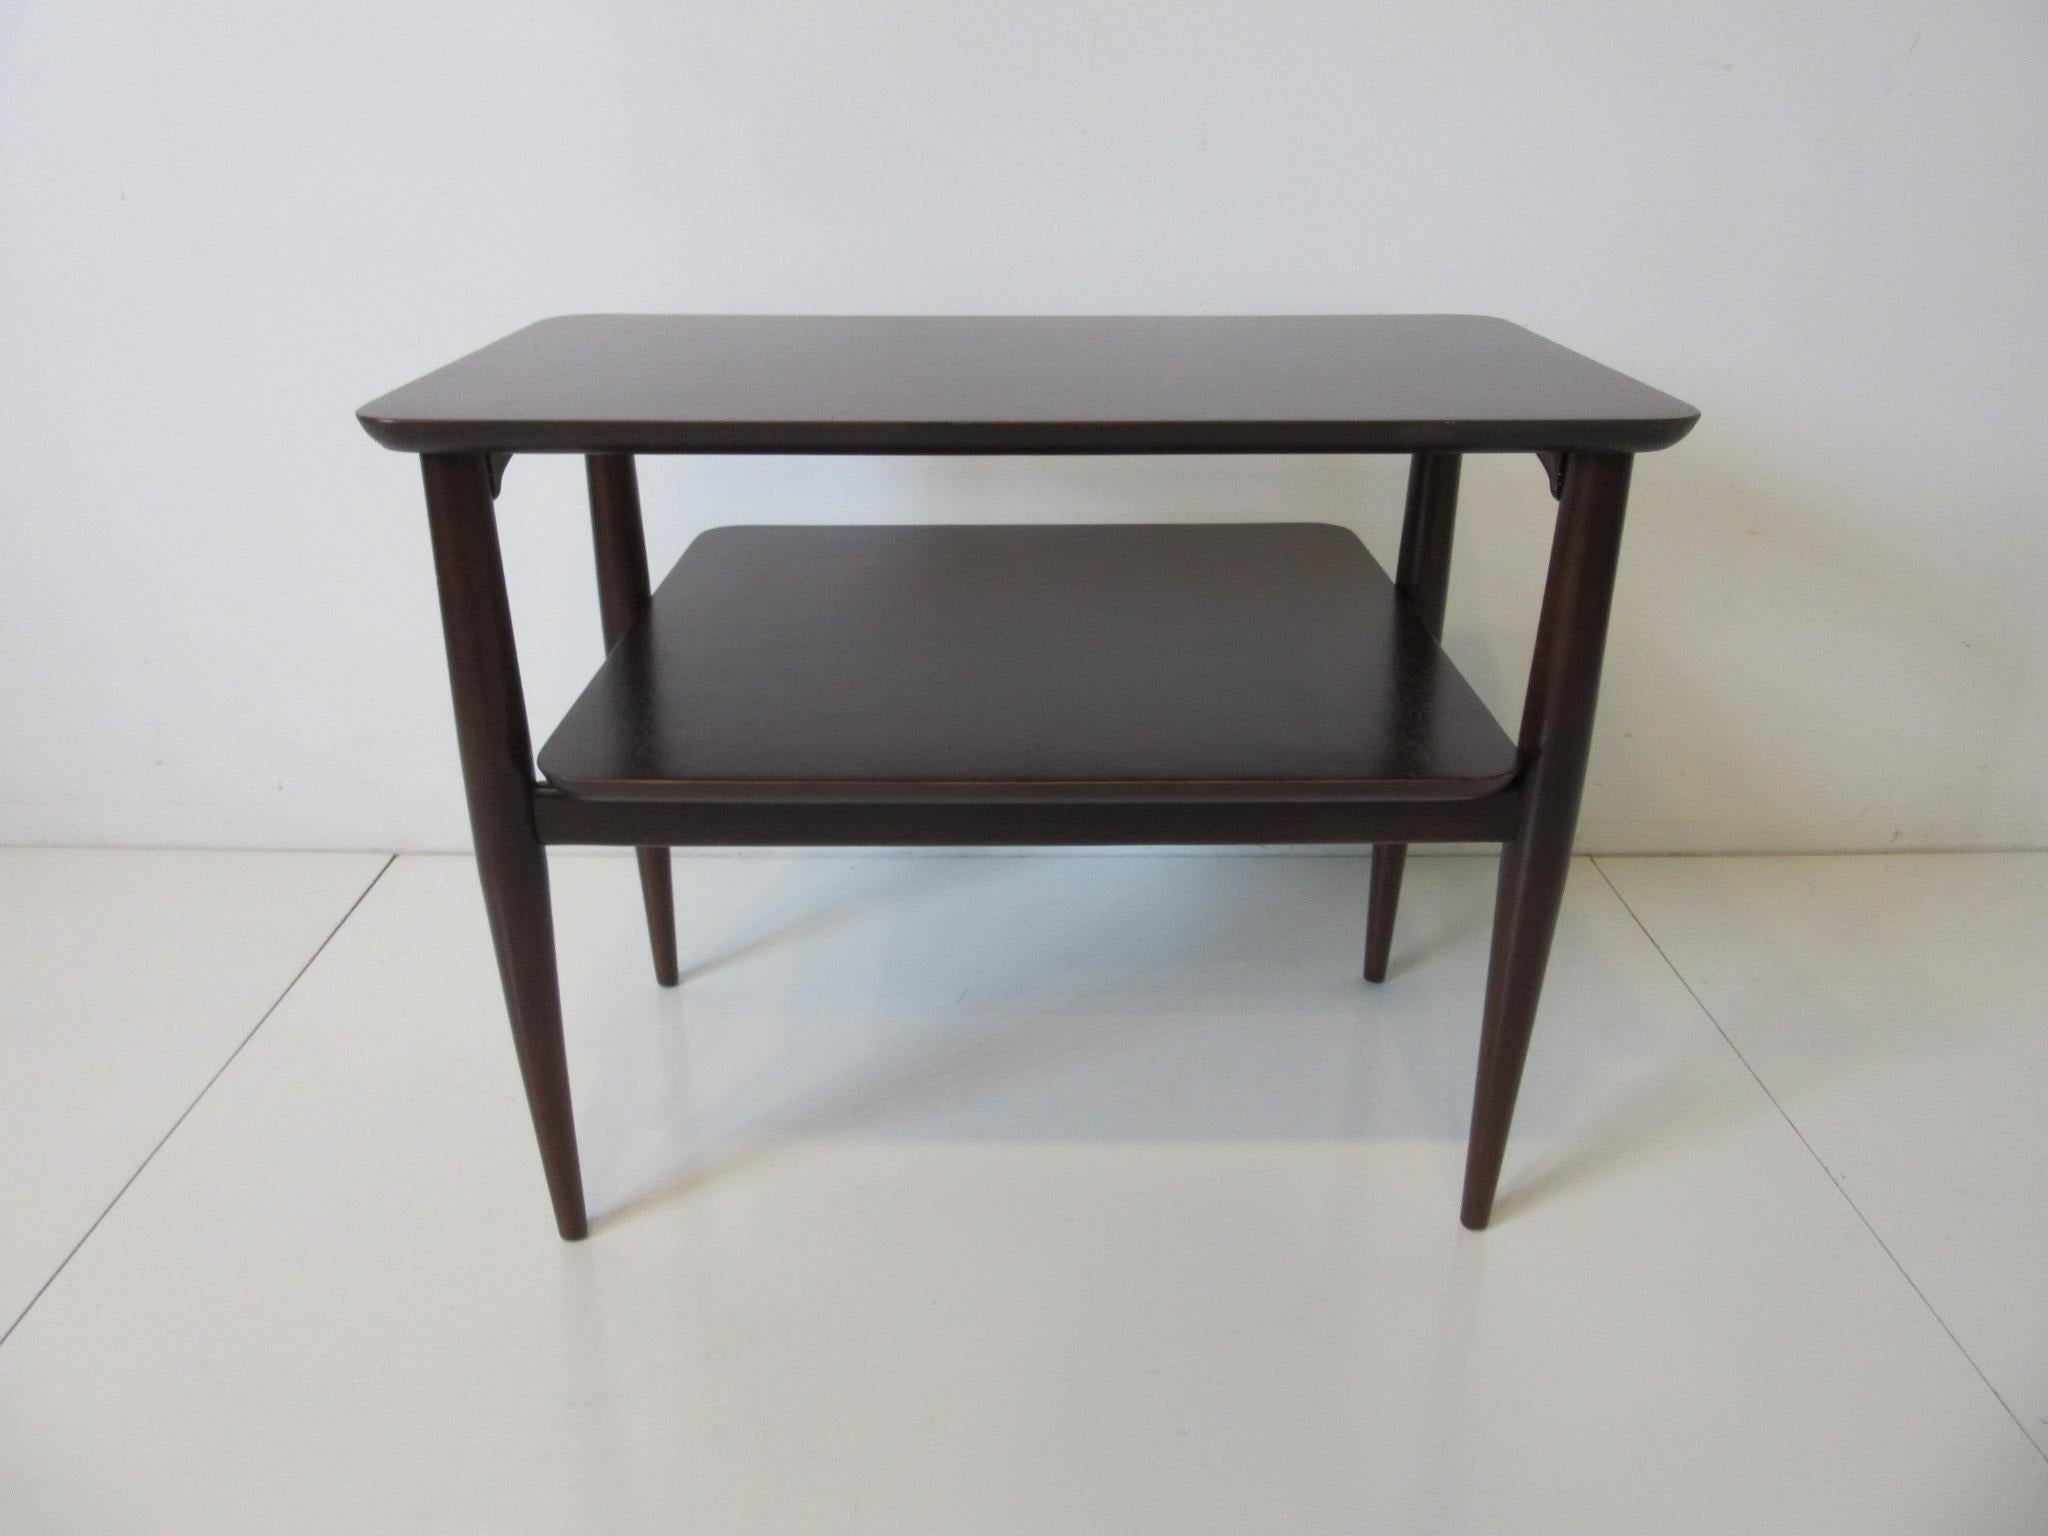 A nice sized midcentury two-tiered wood side table with beveled edges and conical legs refinished in a rich ebony tone giving the piece a very high stylish feel. The perfect table to share between two lounge chairs or able to stand alone.
 